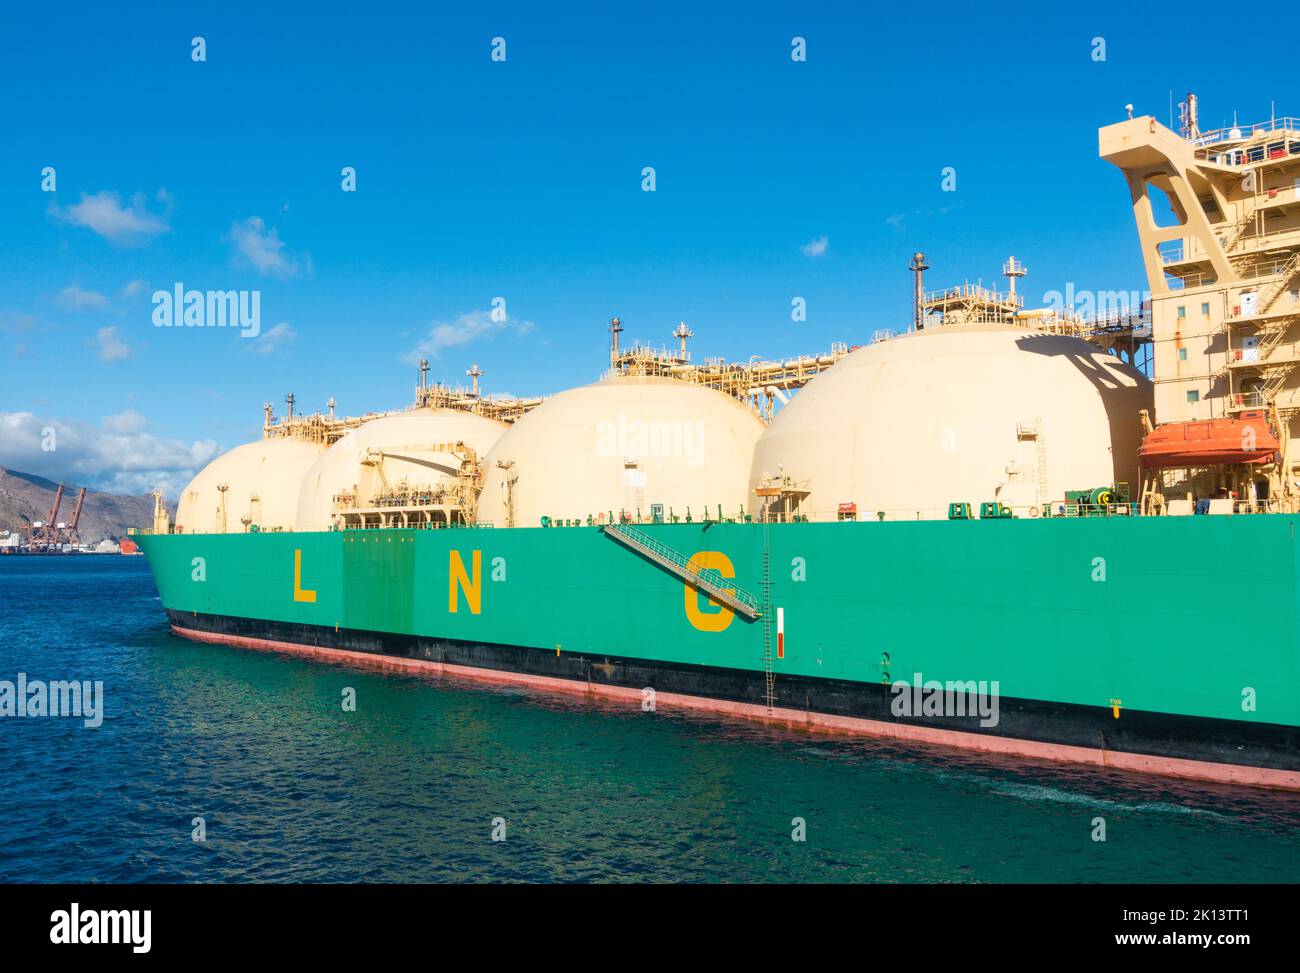 Ship carrying Liquefied natural gas. Stock Photo